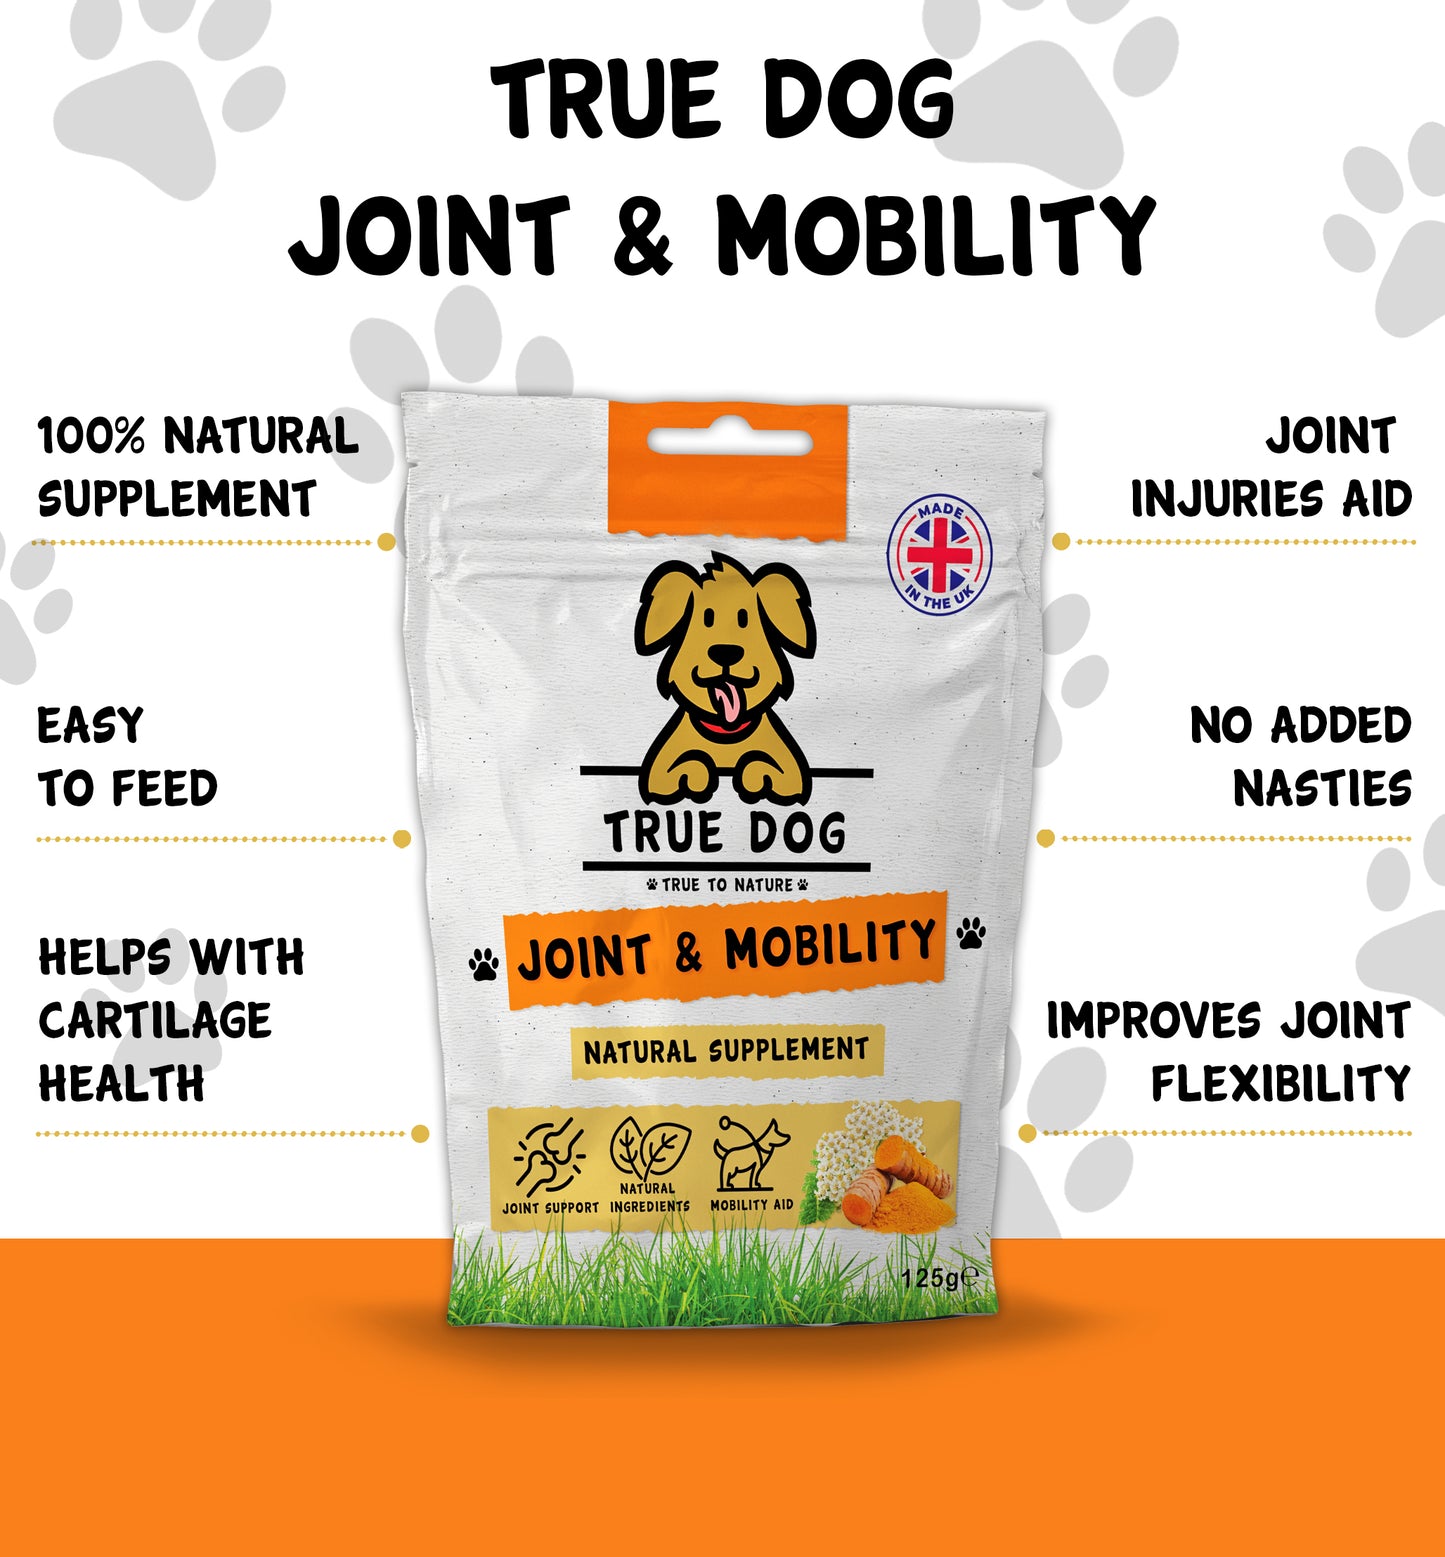 Natural Supplement - Joint & Mobility